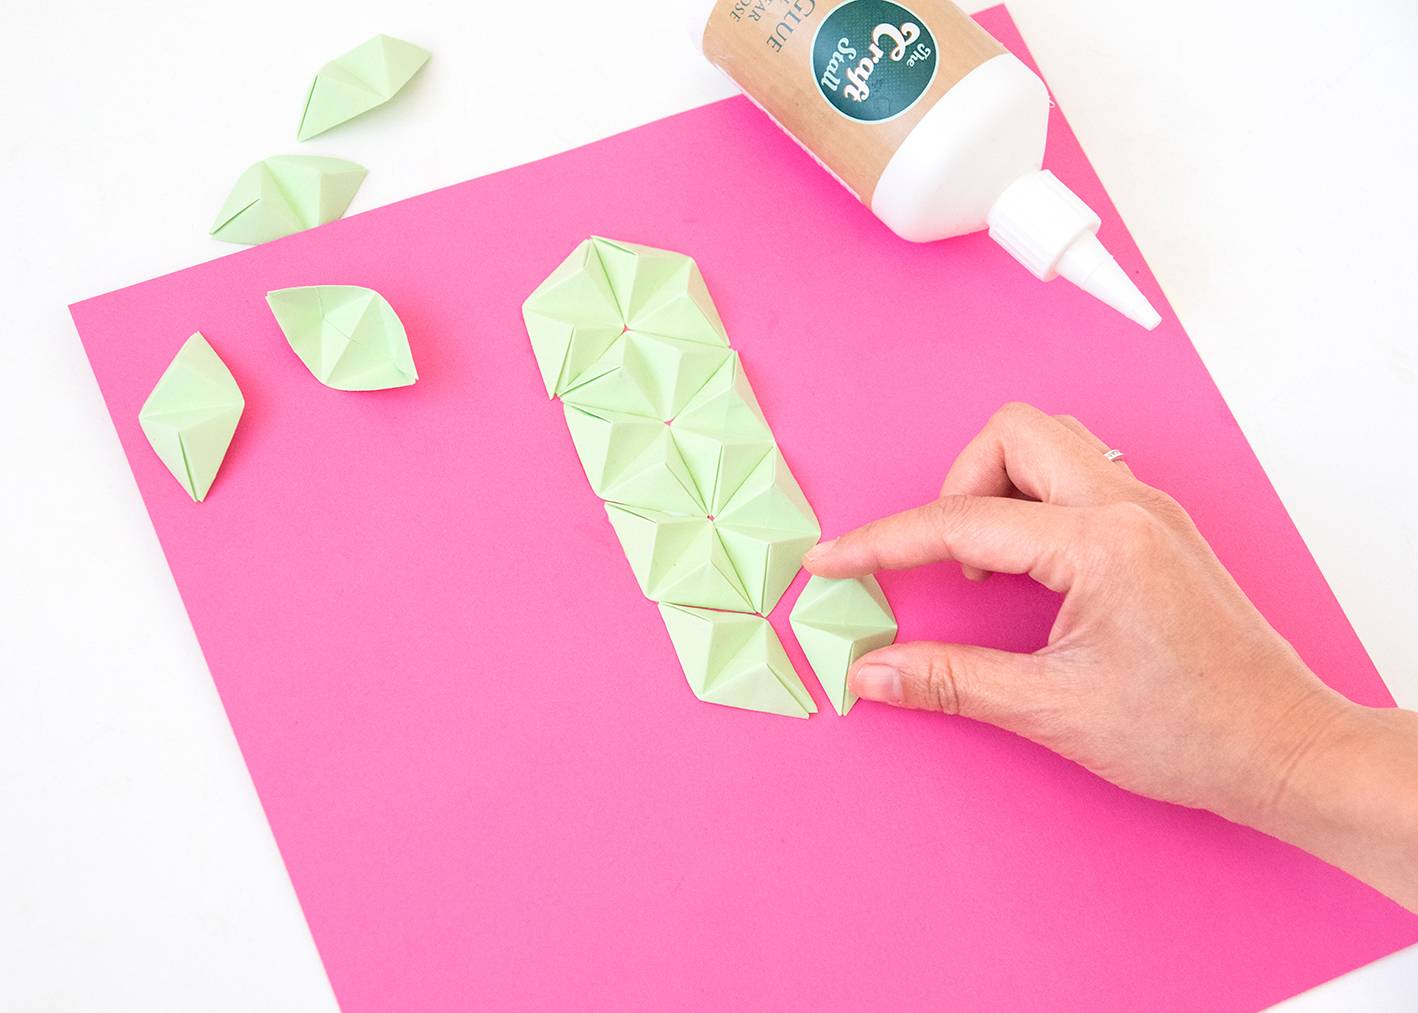 This: Easy Origami Wall in Under 30 Minutes! - Curbly